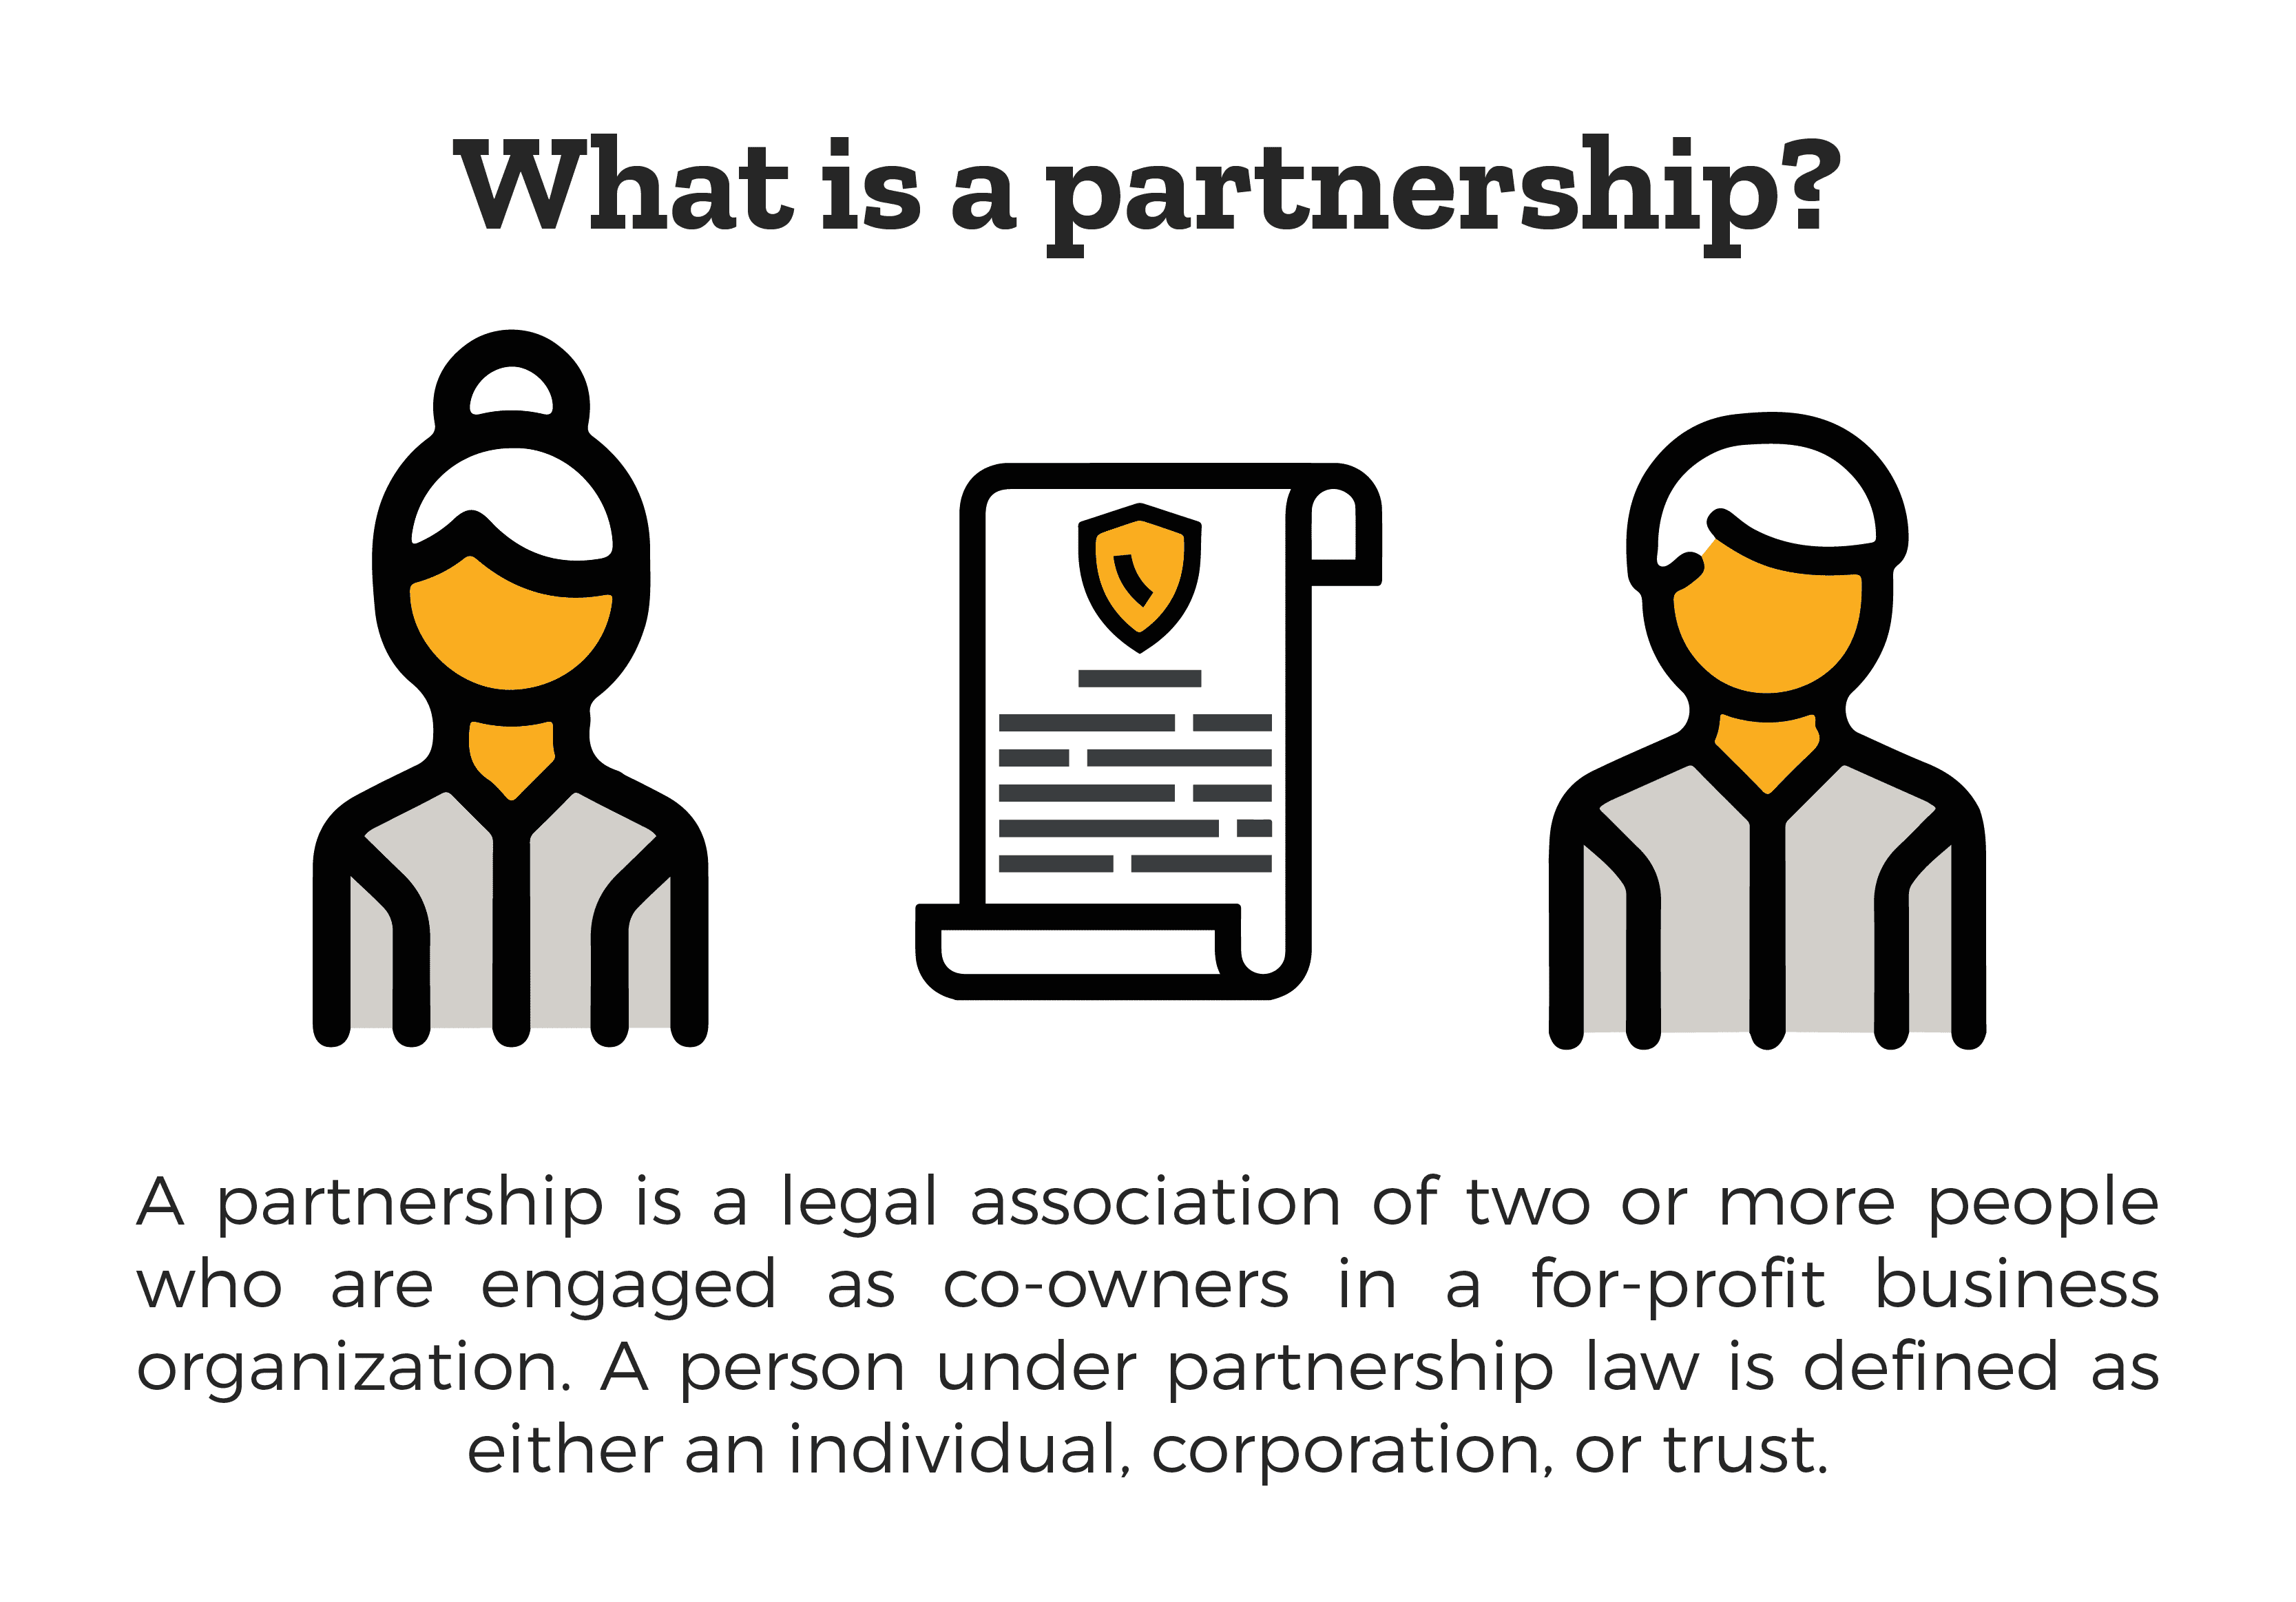 What Is a Business Partnership? - a business partnership is a legal association of two or more people who are engaged as co-owners in a for-profit business organization. A person under business partnership law is defined as either an individual, corporation, or trust.